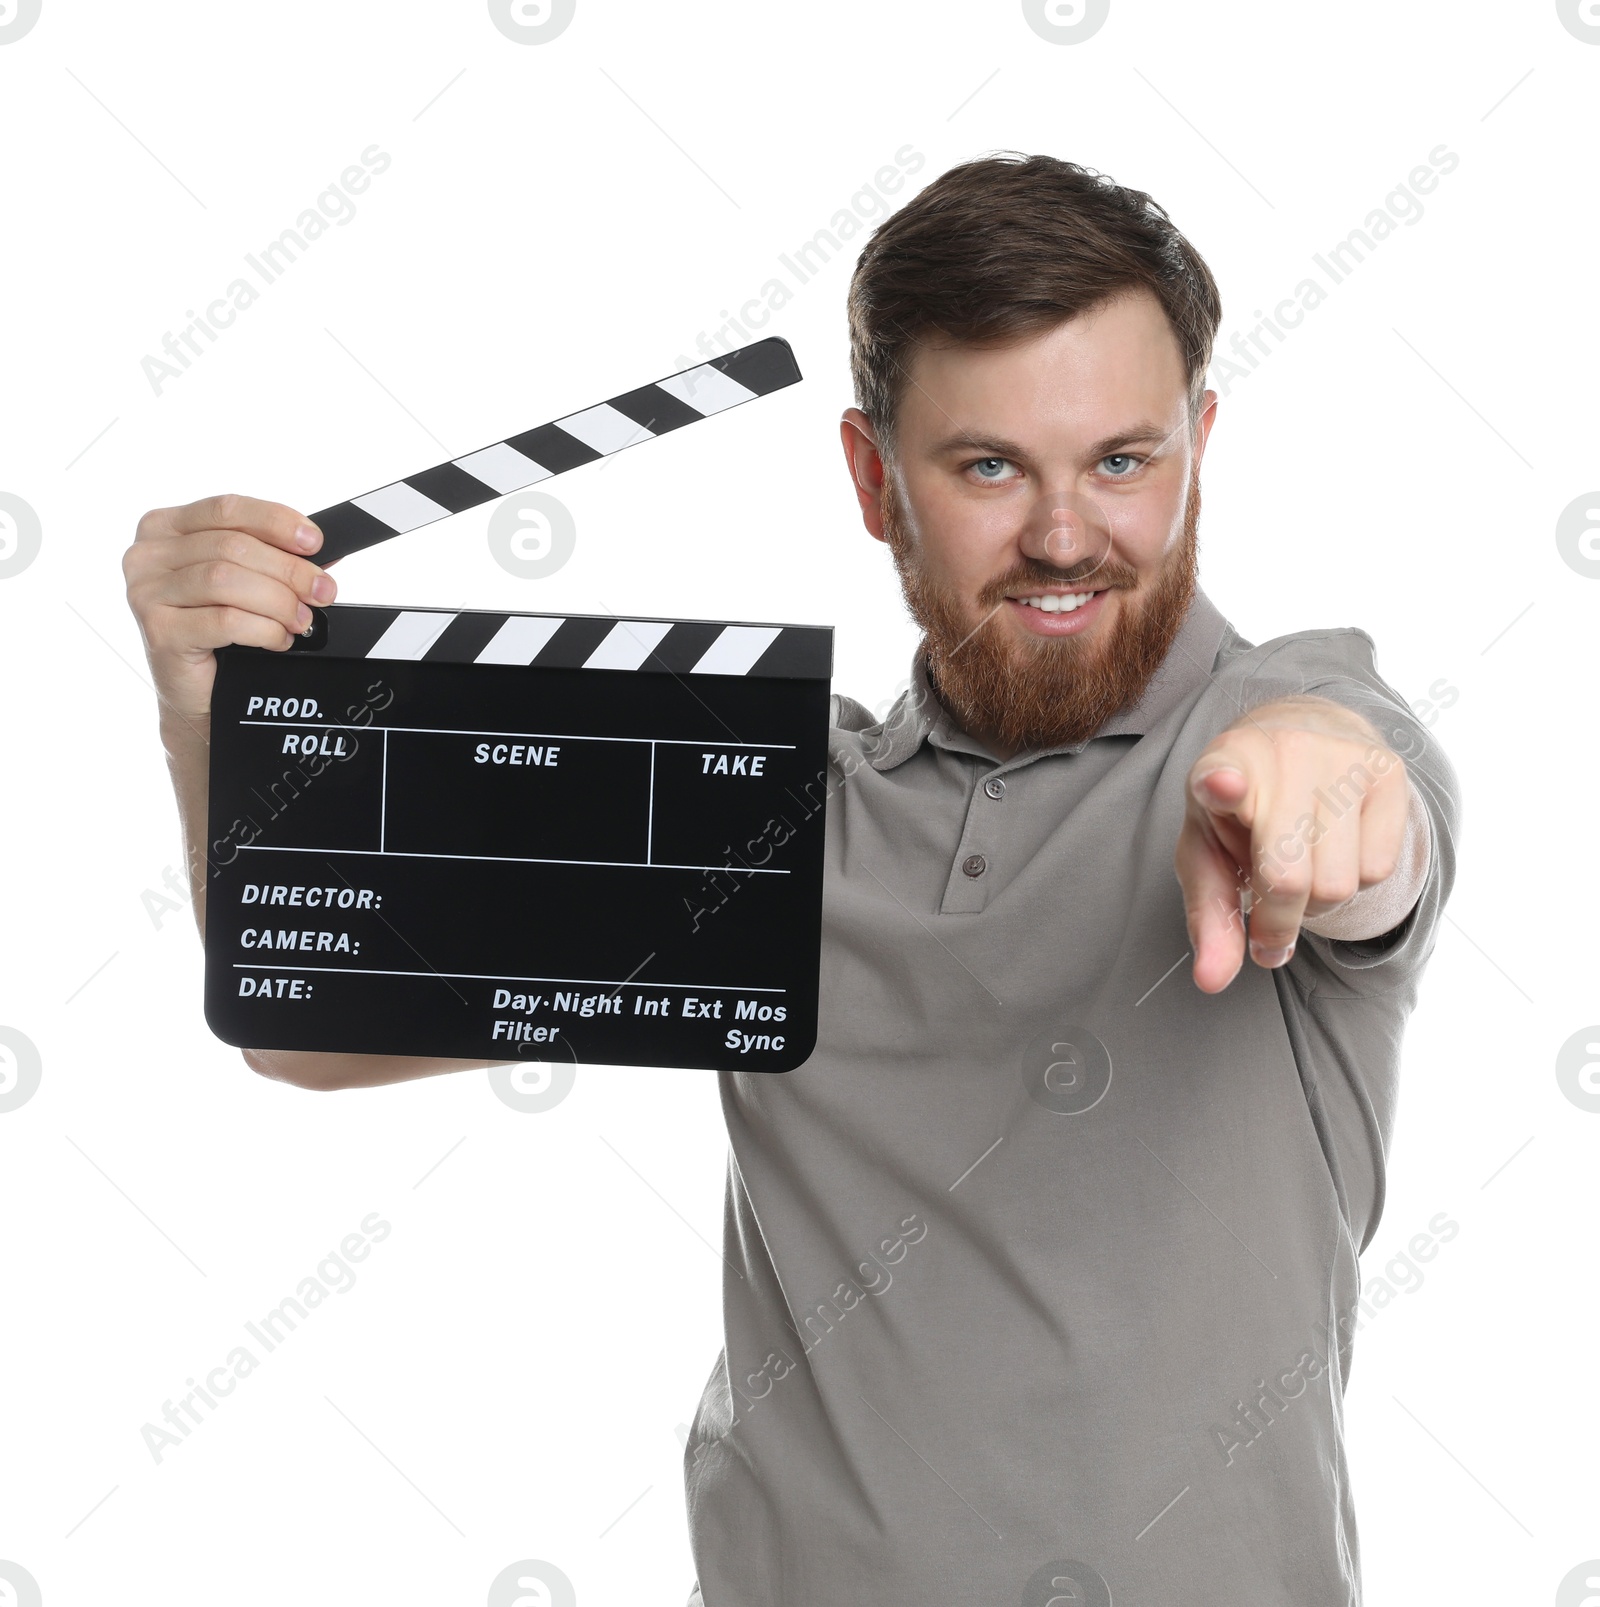 Photo of Making movie. Smiling man with clapperboard pointing at camera on white background